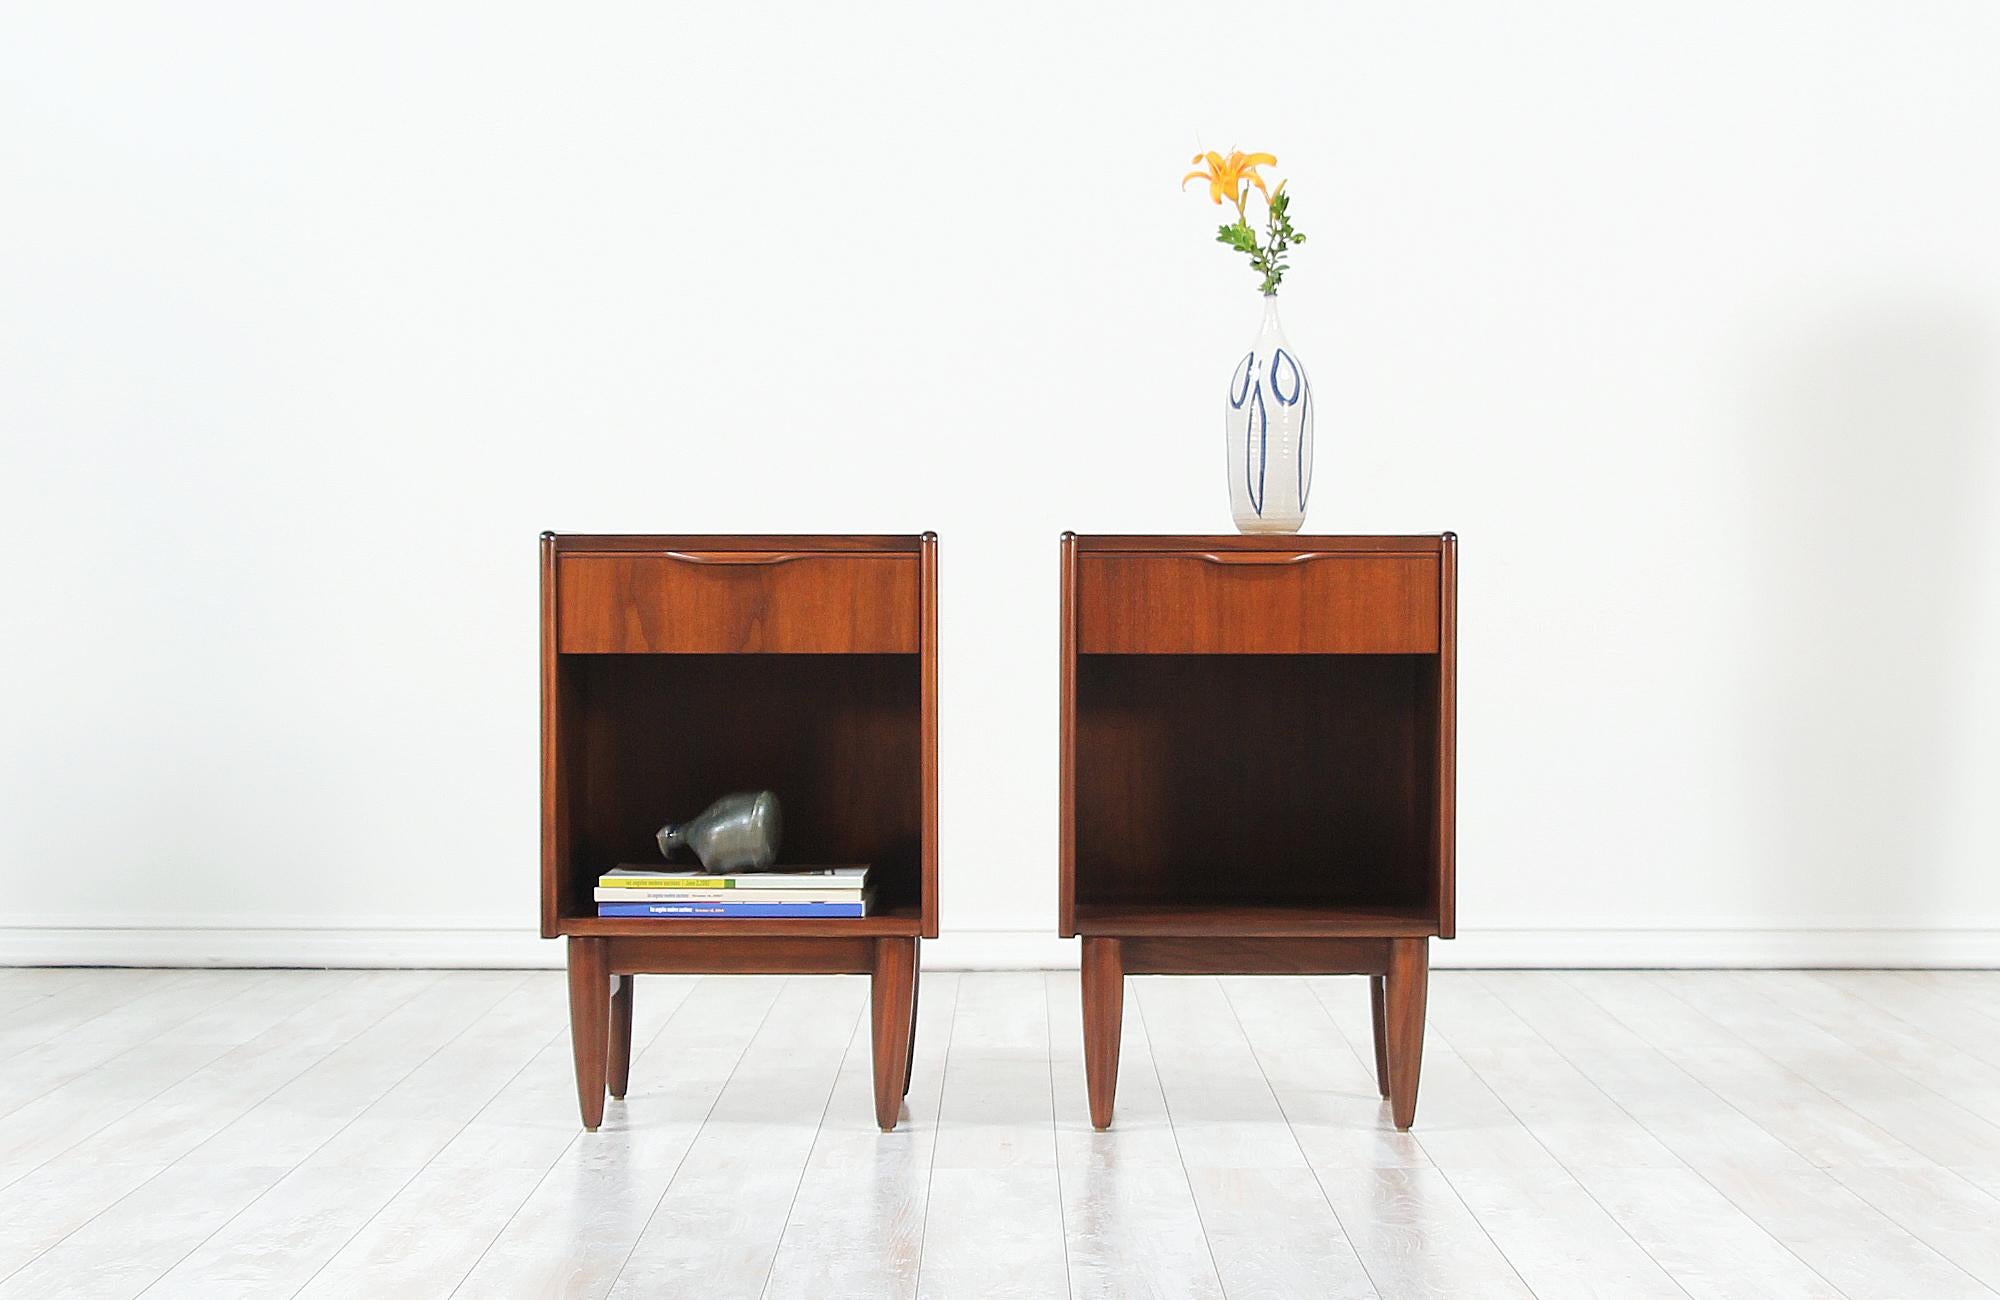 Exceptional pair of Danish modern night stands designed and manufactured in Denmark, circa 1950s. These gorgeous night stands are newly refinished by our expert craftsmen to feature a sturdy and sleek design offering ample storage. Each nightstand